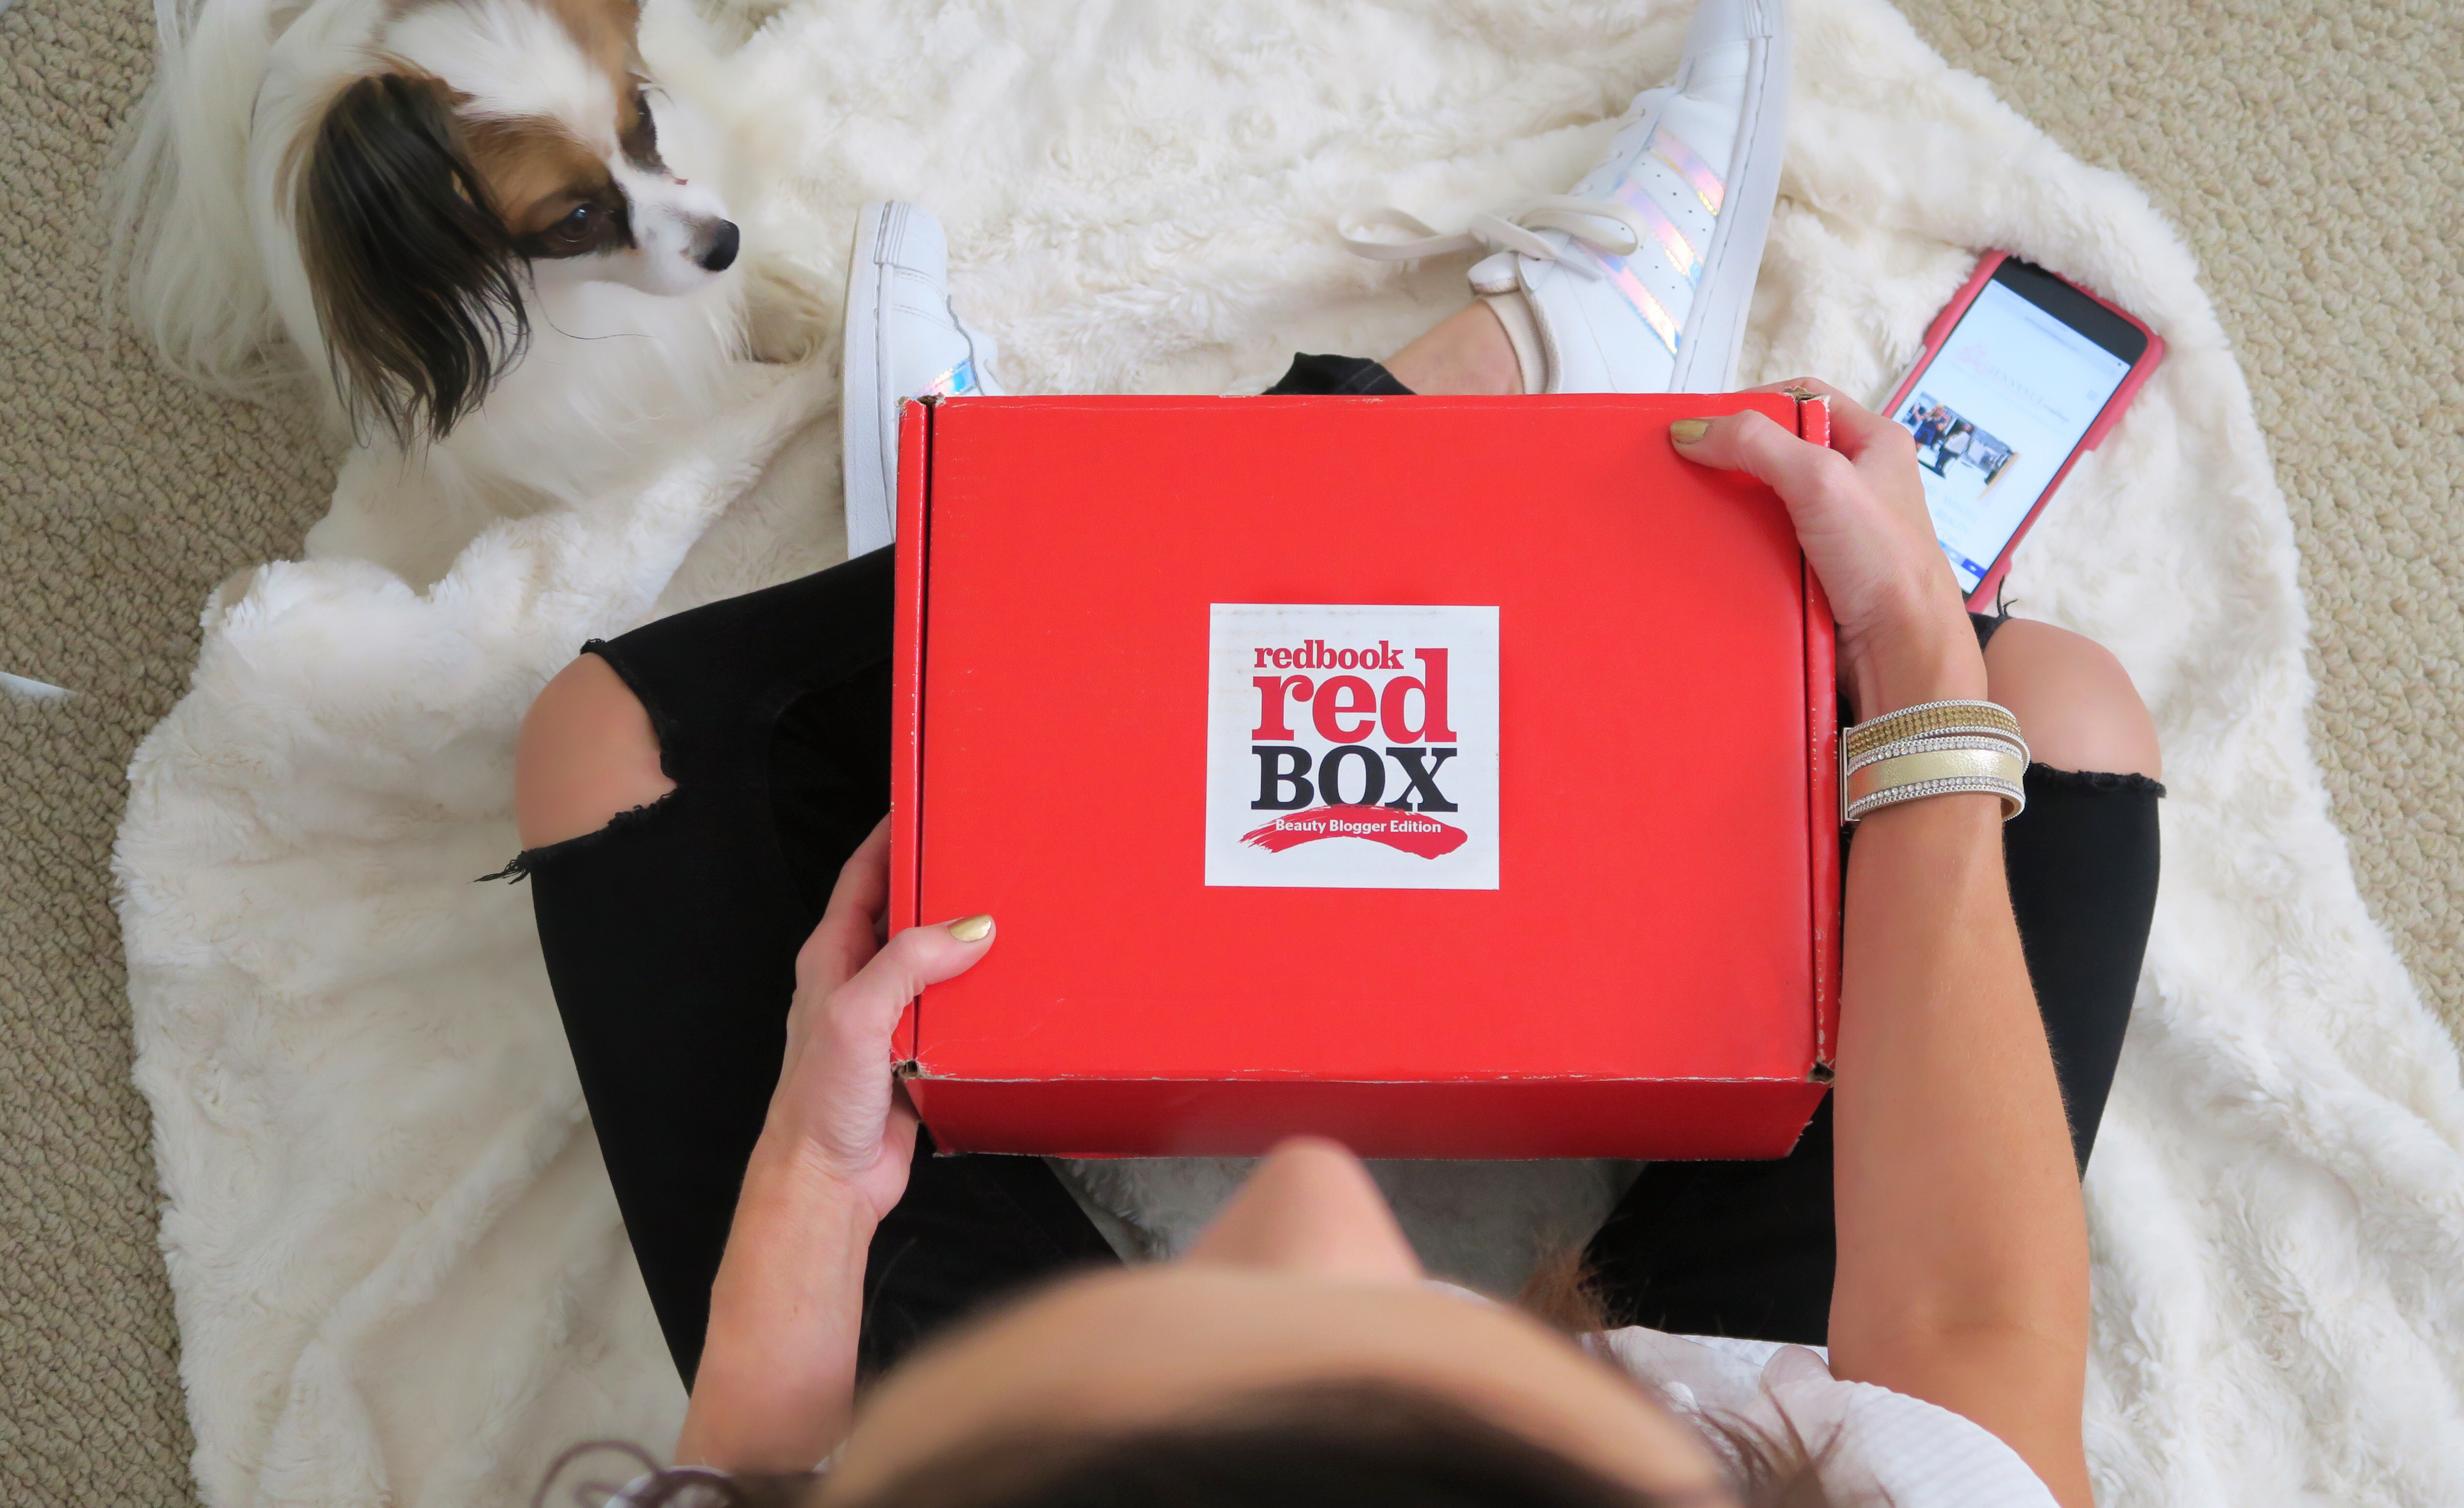 Beauty Blogger Approved Hair & Skin Products : RedBook Red Beauty Box